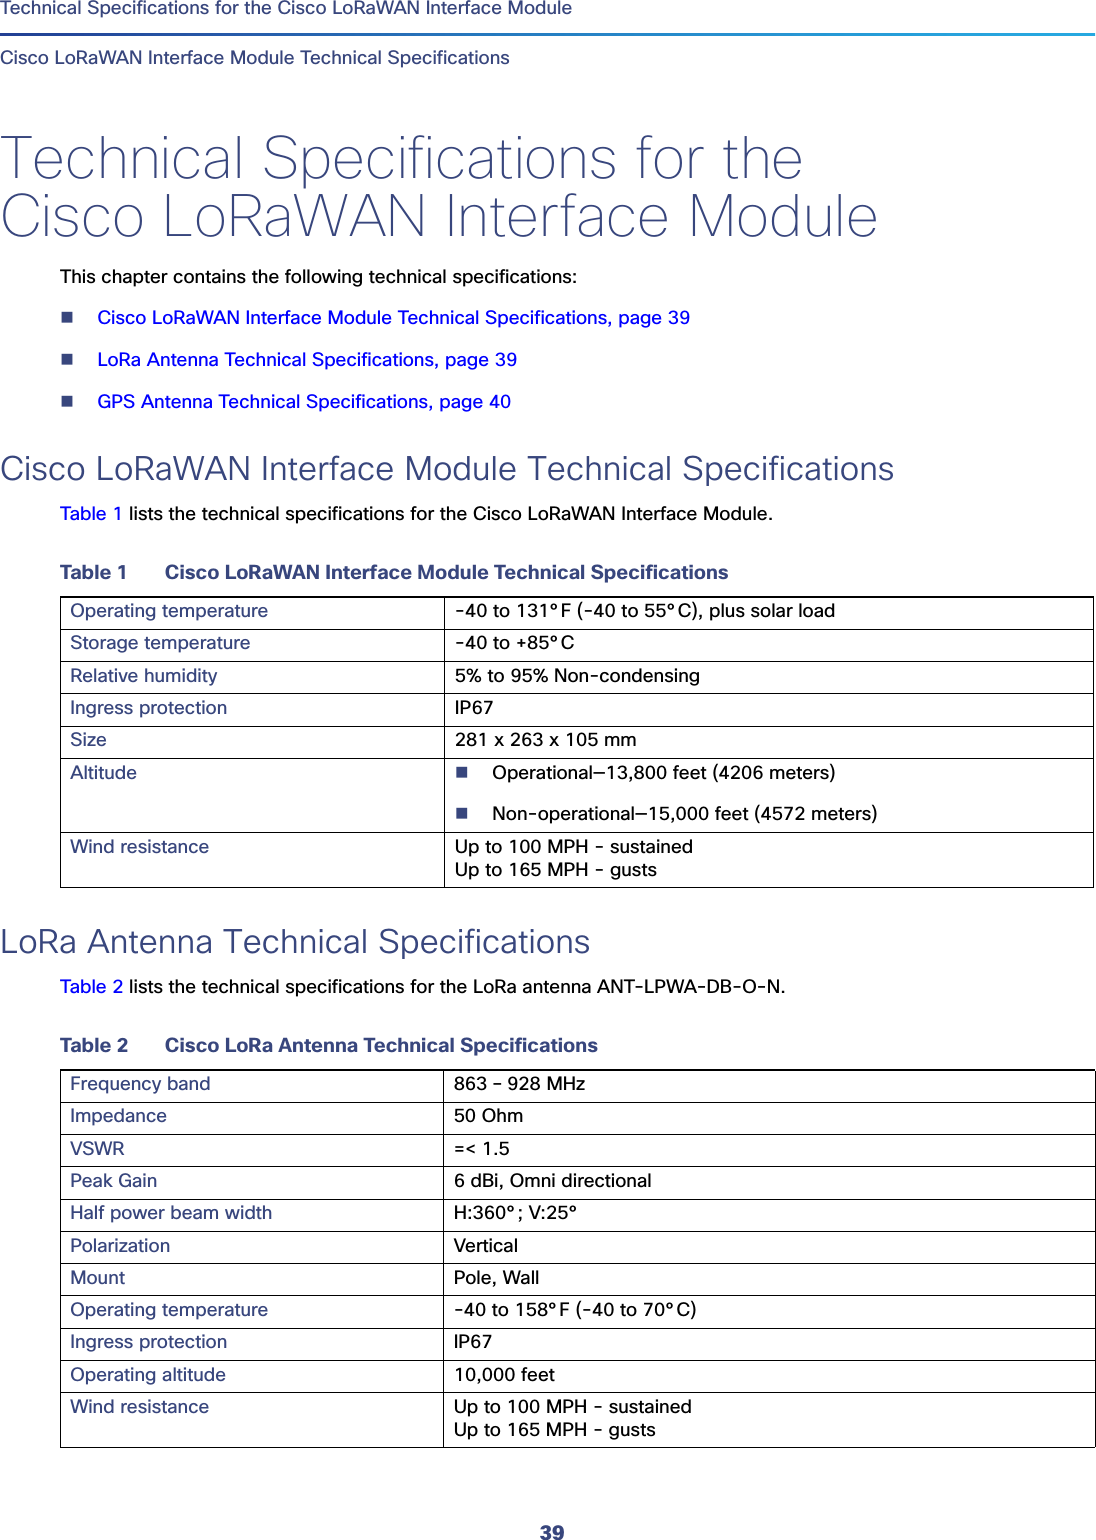 39  Technical Specifications for the Cisco LoRaWAN Interface ModuleCisco LoRaWAN Interface Module Technical SpecificationsTechnical Specifications for the Cisco LoRaWAN Interface ModuleThis chapter contains the following technical specifications:Cisco LoRaWAN Interface Module Technical Specifications, page 39LoRa Antenna Technical Specifications, page 39GPS Antenna Technical Specifications, page 40Cisco LoRaWAN Interface Module Technical SpecificationsTable 1 lists the technical specifications for the Cisco LoRaWAN Interface Module. LoRa Antenna Technical SpecificationsTable 2 lists the technical specifications for the LoRa antenna ANT-LPWA-DB-O-N. Table 1 Cisco LoRaWAN Interface Module Technical SpecificationsOperating temperature -40 to 131°F (-40 to 55°C), plus solar load Storage temperature -40 to +85°CRelative humidity 5% to 95% Non-condensingIngress protection IP67Size 281 x 263 x 105 mmAltitude Operational—13,800 feet (4206 meters)Non-operational—15,000 feet (4572 meters)Wind resistance Up to 100 MPH - sustainedUp to 165 MPH - gustsTable 2 Cisco LoRa Antenna Technical SpecificationsFrequency band 863 – 928 MHzImpedance 50 OhmVSWR =&lt; 1.5Peak Gain 6 dBi, Omni directionalHalf power beam width H:360°; V:25°Polarization VerticalMount Pole, WallOperating temperature -40 to 158°F (-40 to 70°C)Ingress protection IP67Operating altitude 10,000 feetWind resistance Up to 100 MPH - sustainedUp to 165 MPH - gusts